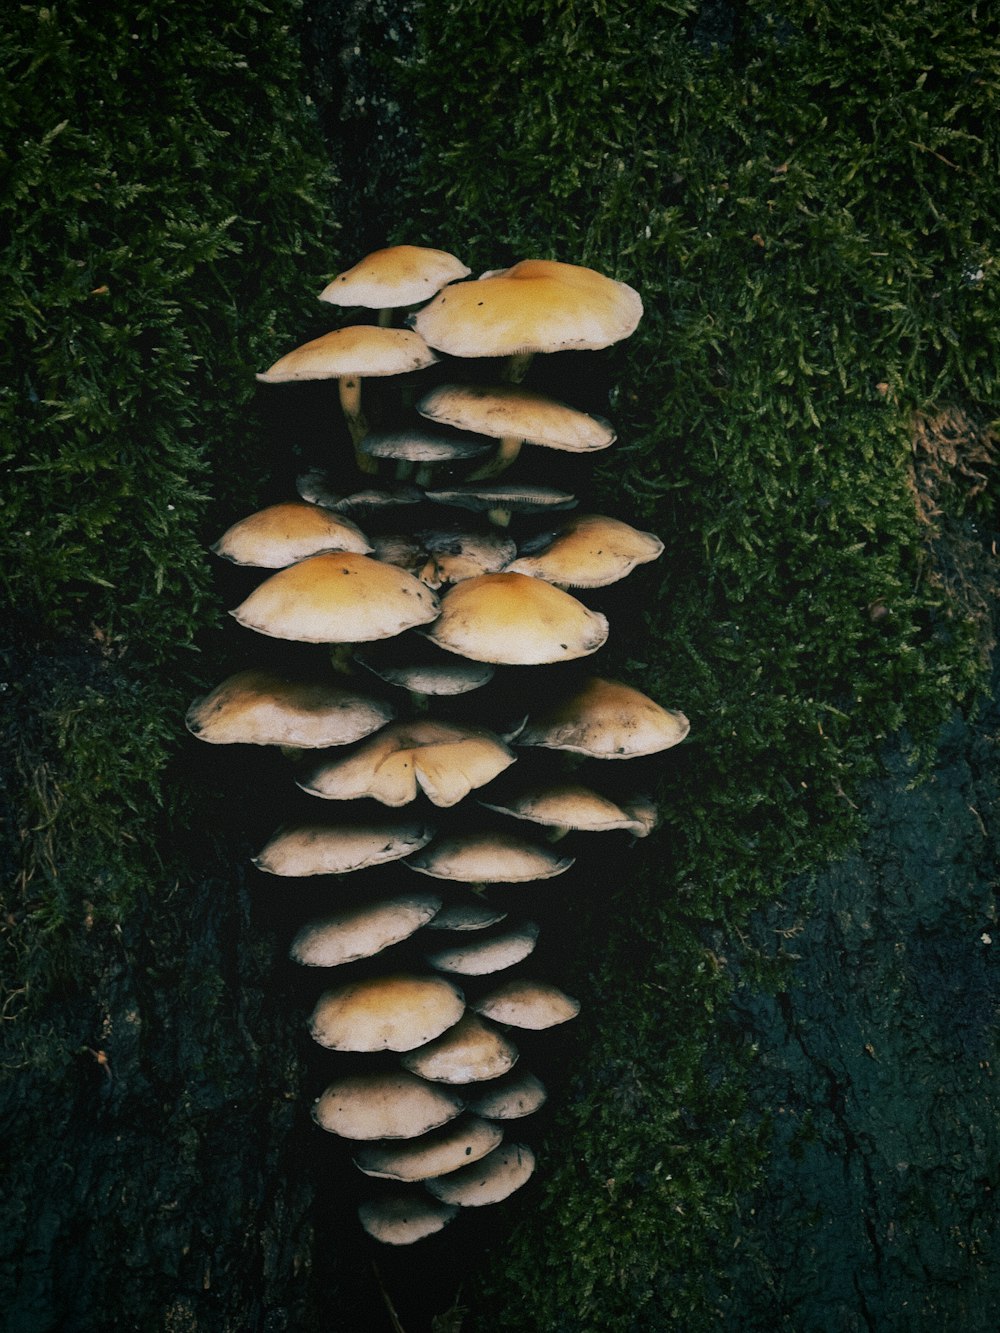 a group of mushrooms growing in a tree